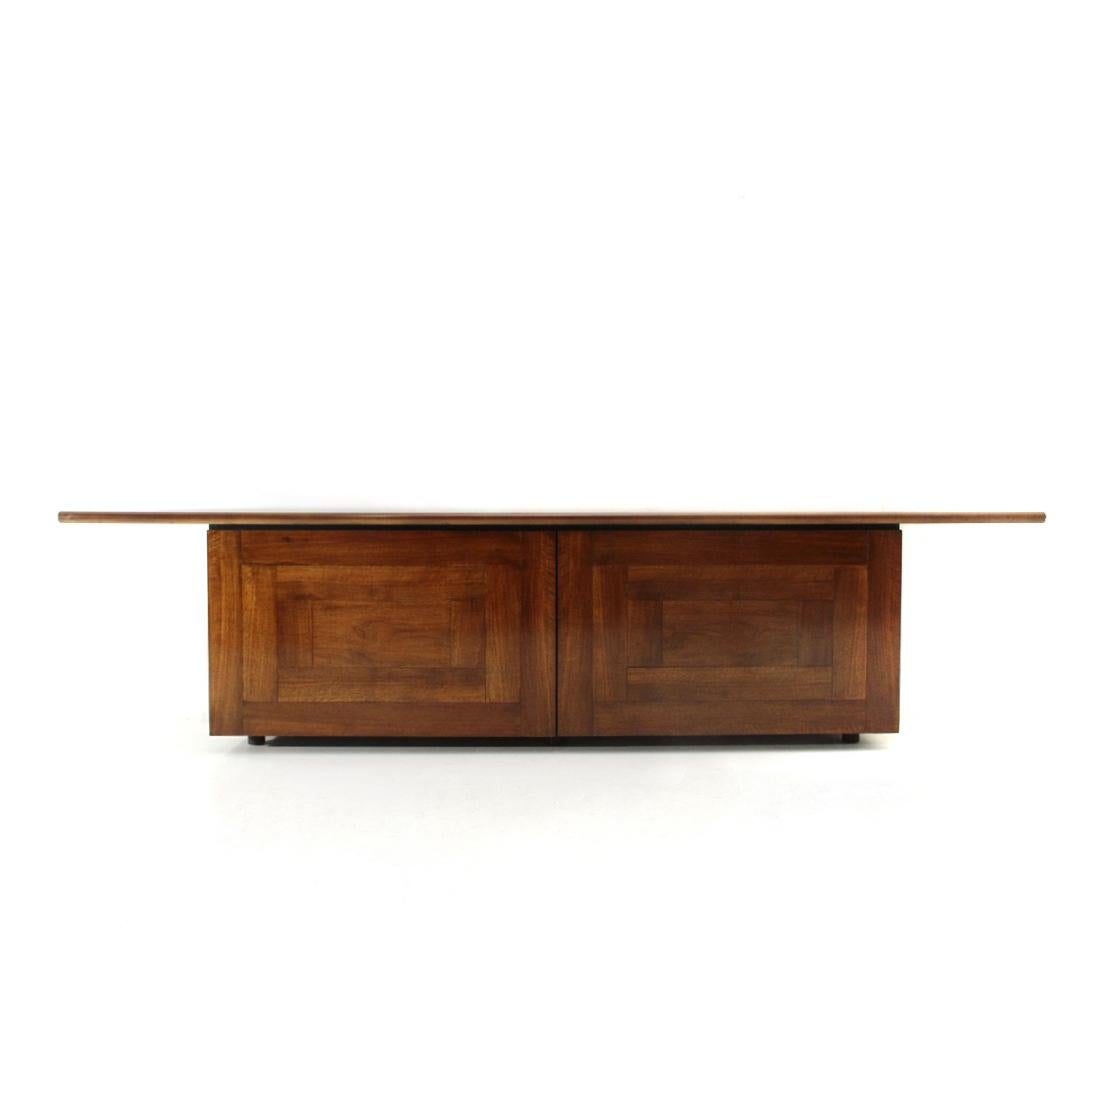 Sideboard produced in the 1970s by Acerbis, design by Giotto Stoppino and Lodovico Acerbis.
Structure in black laminated wood.
Top in walnut veneered wood.
Veneered walnut doors with opening system that combines sliding and hinged